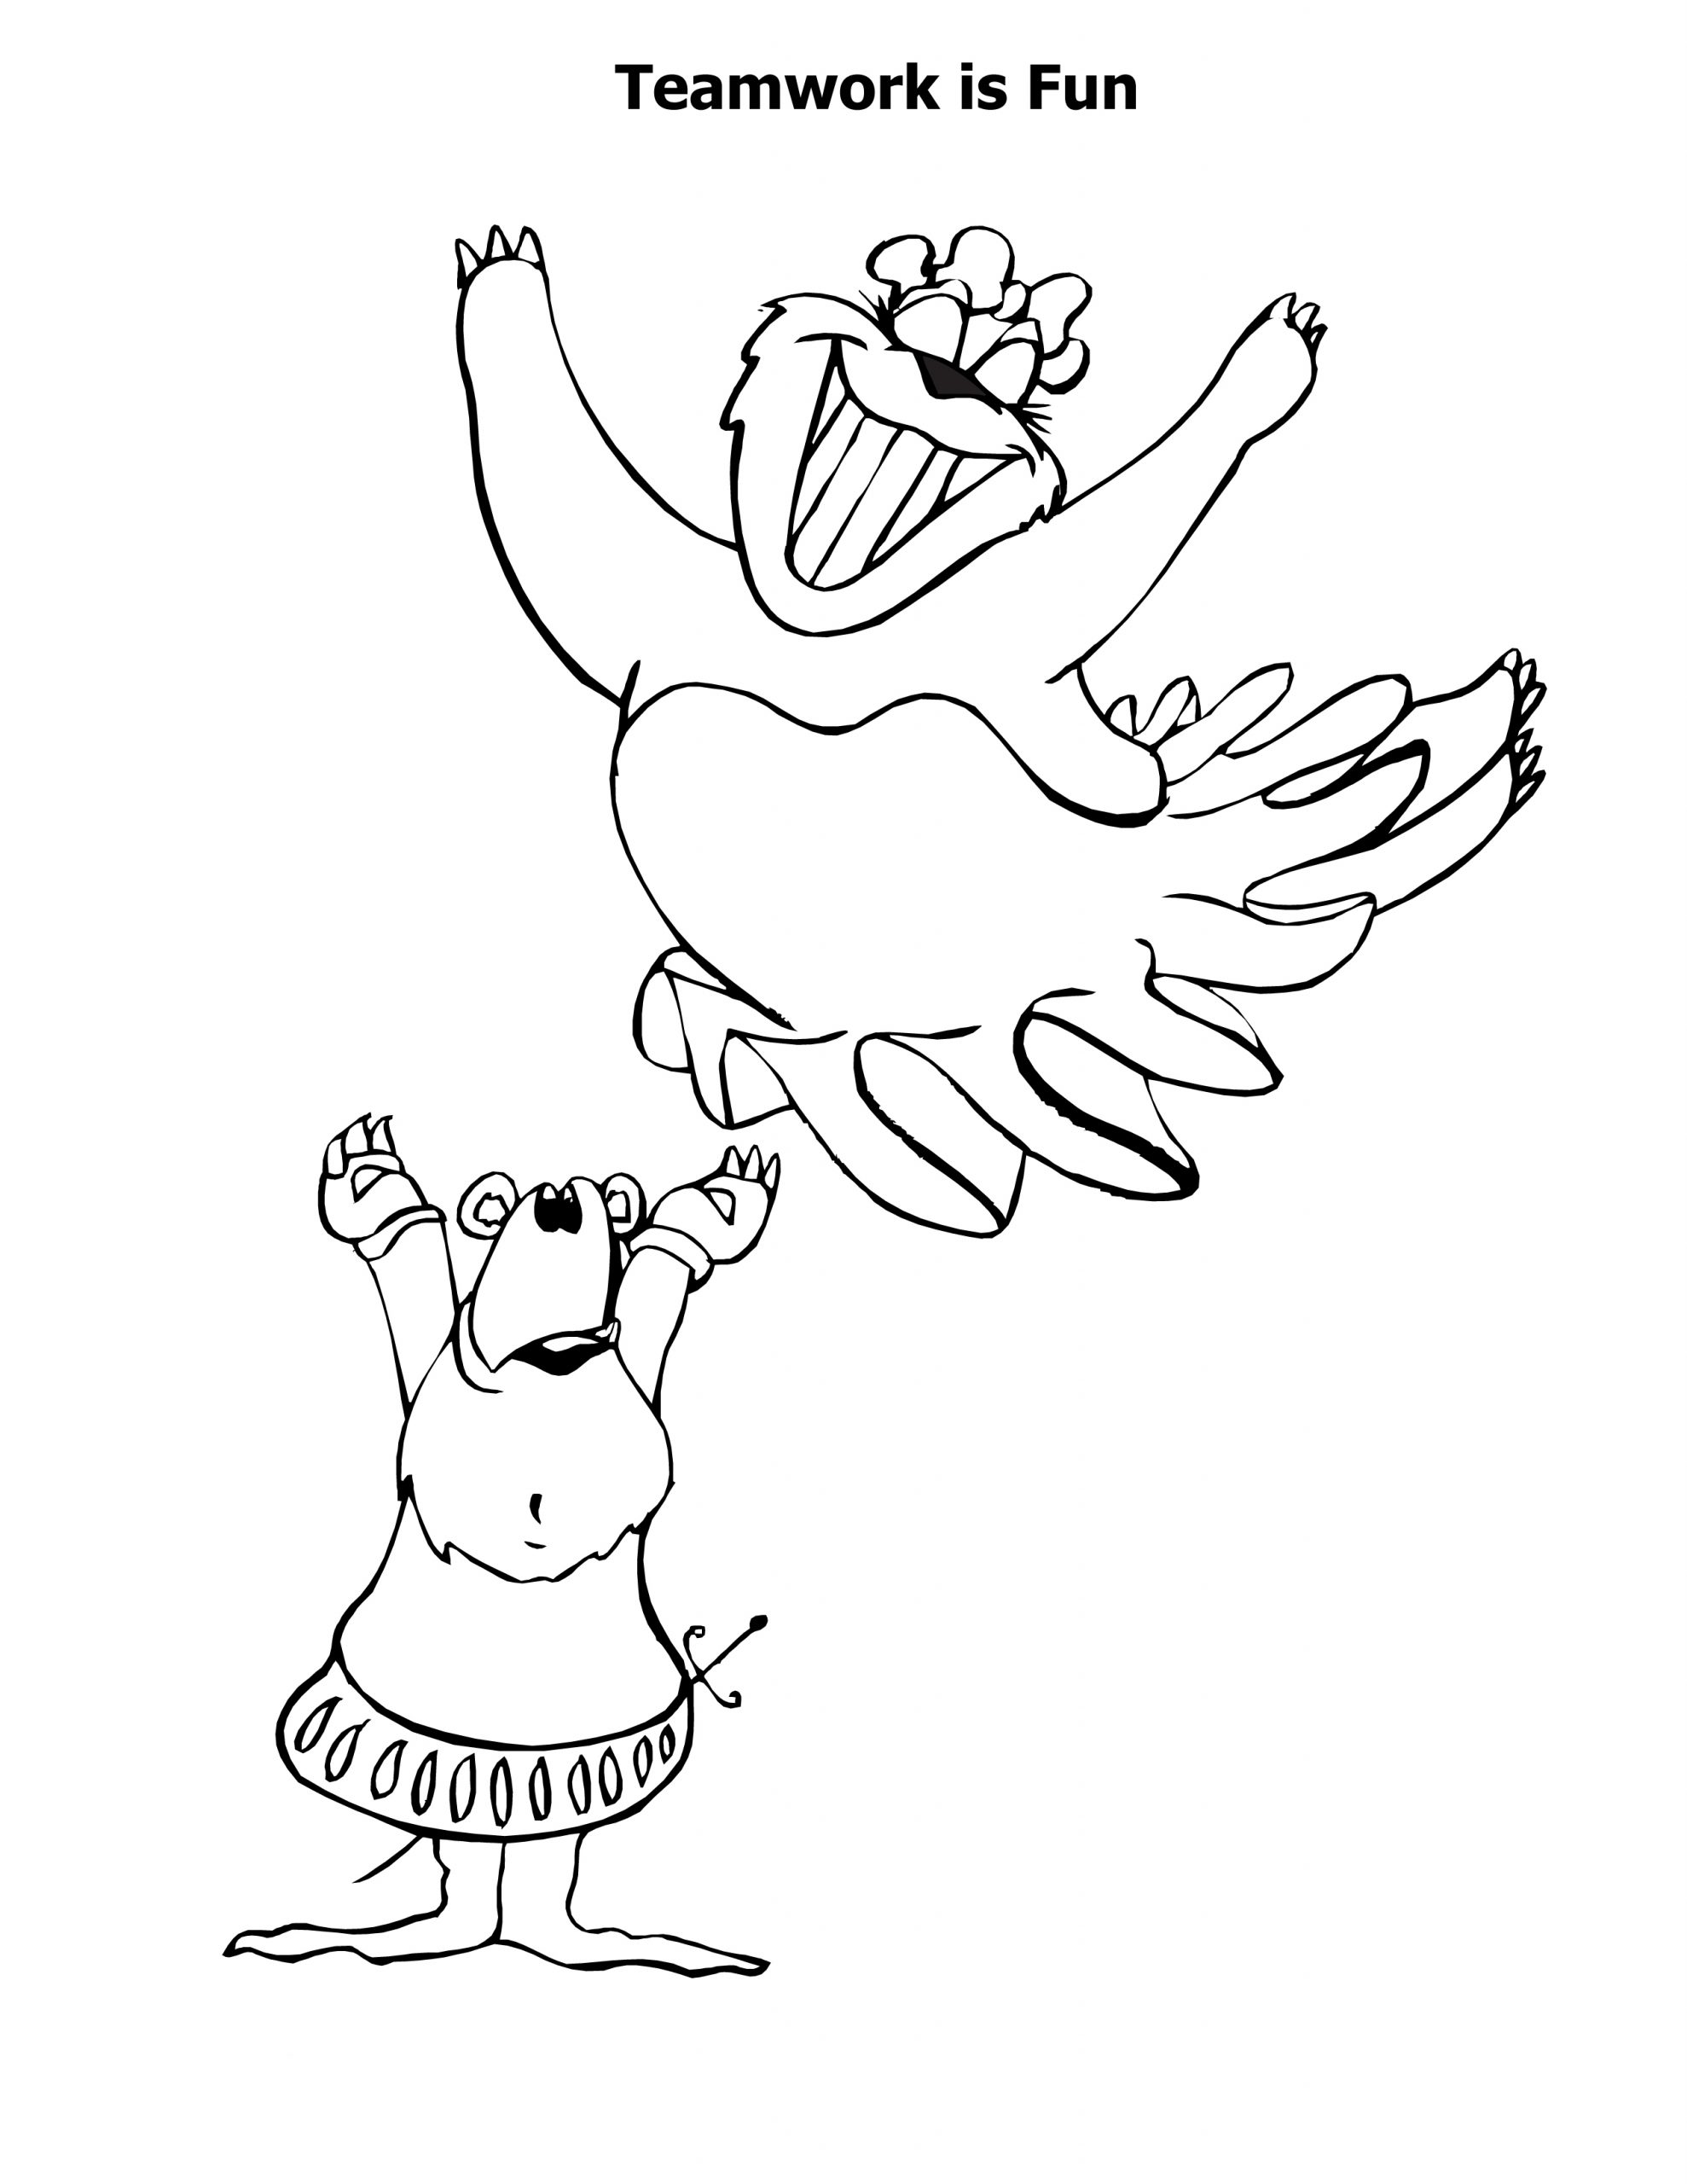 Teamwork Coloring Pages For Kids